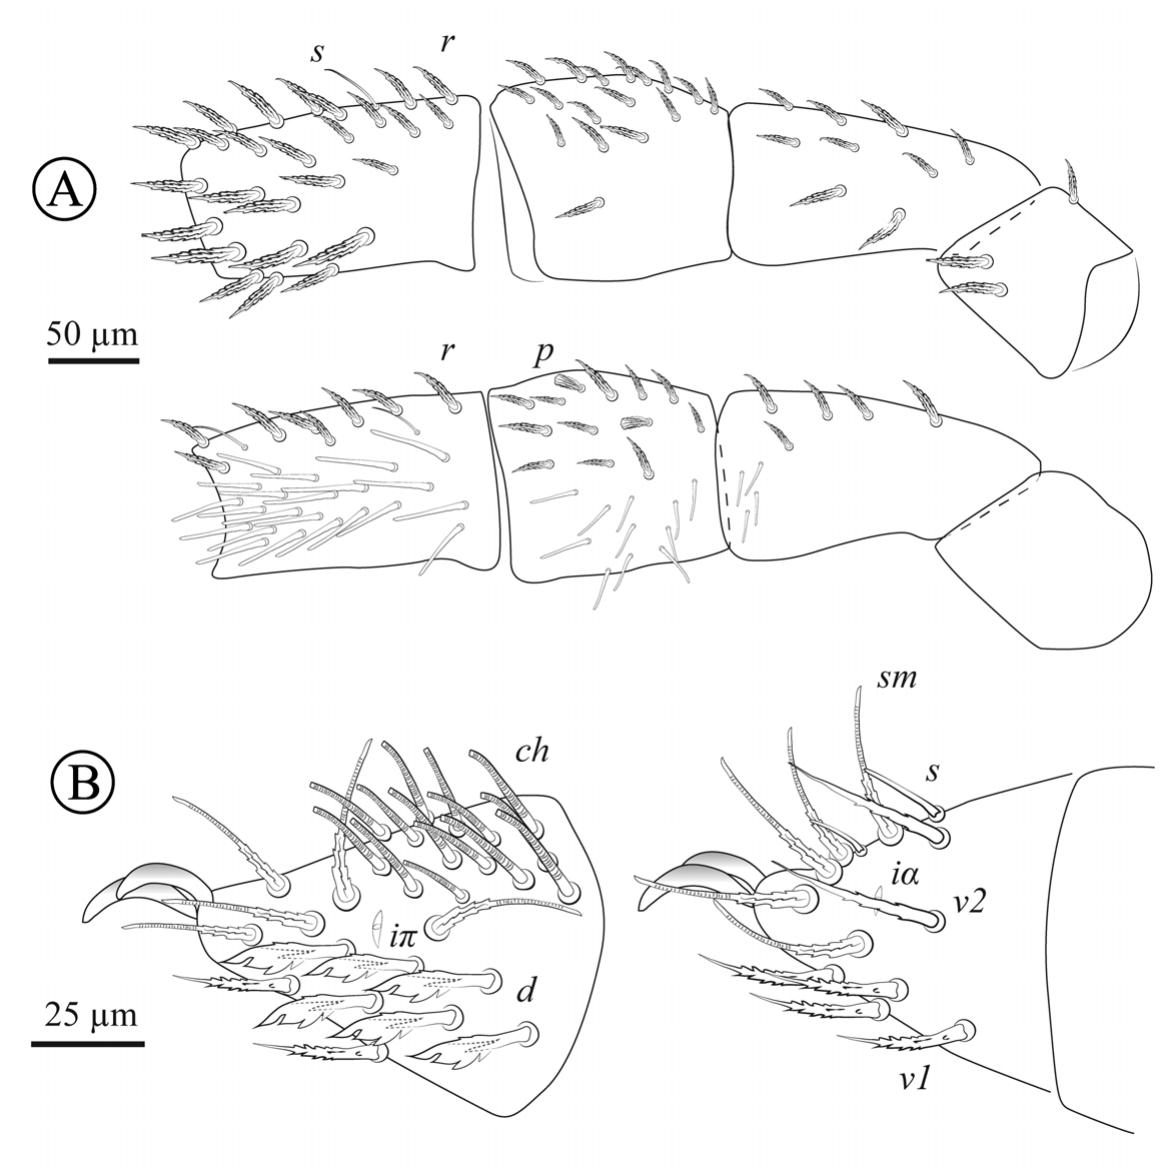 A new species of cave-dwelling Neocarus (Opilioacaridae) from